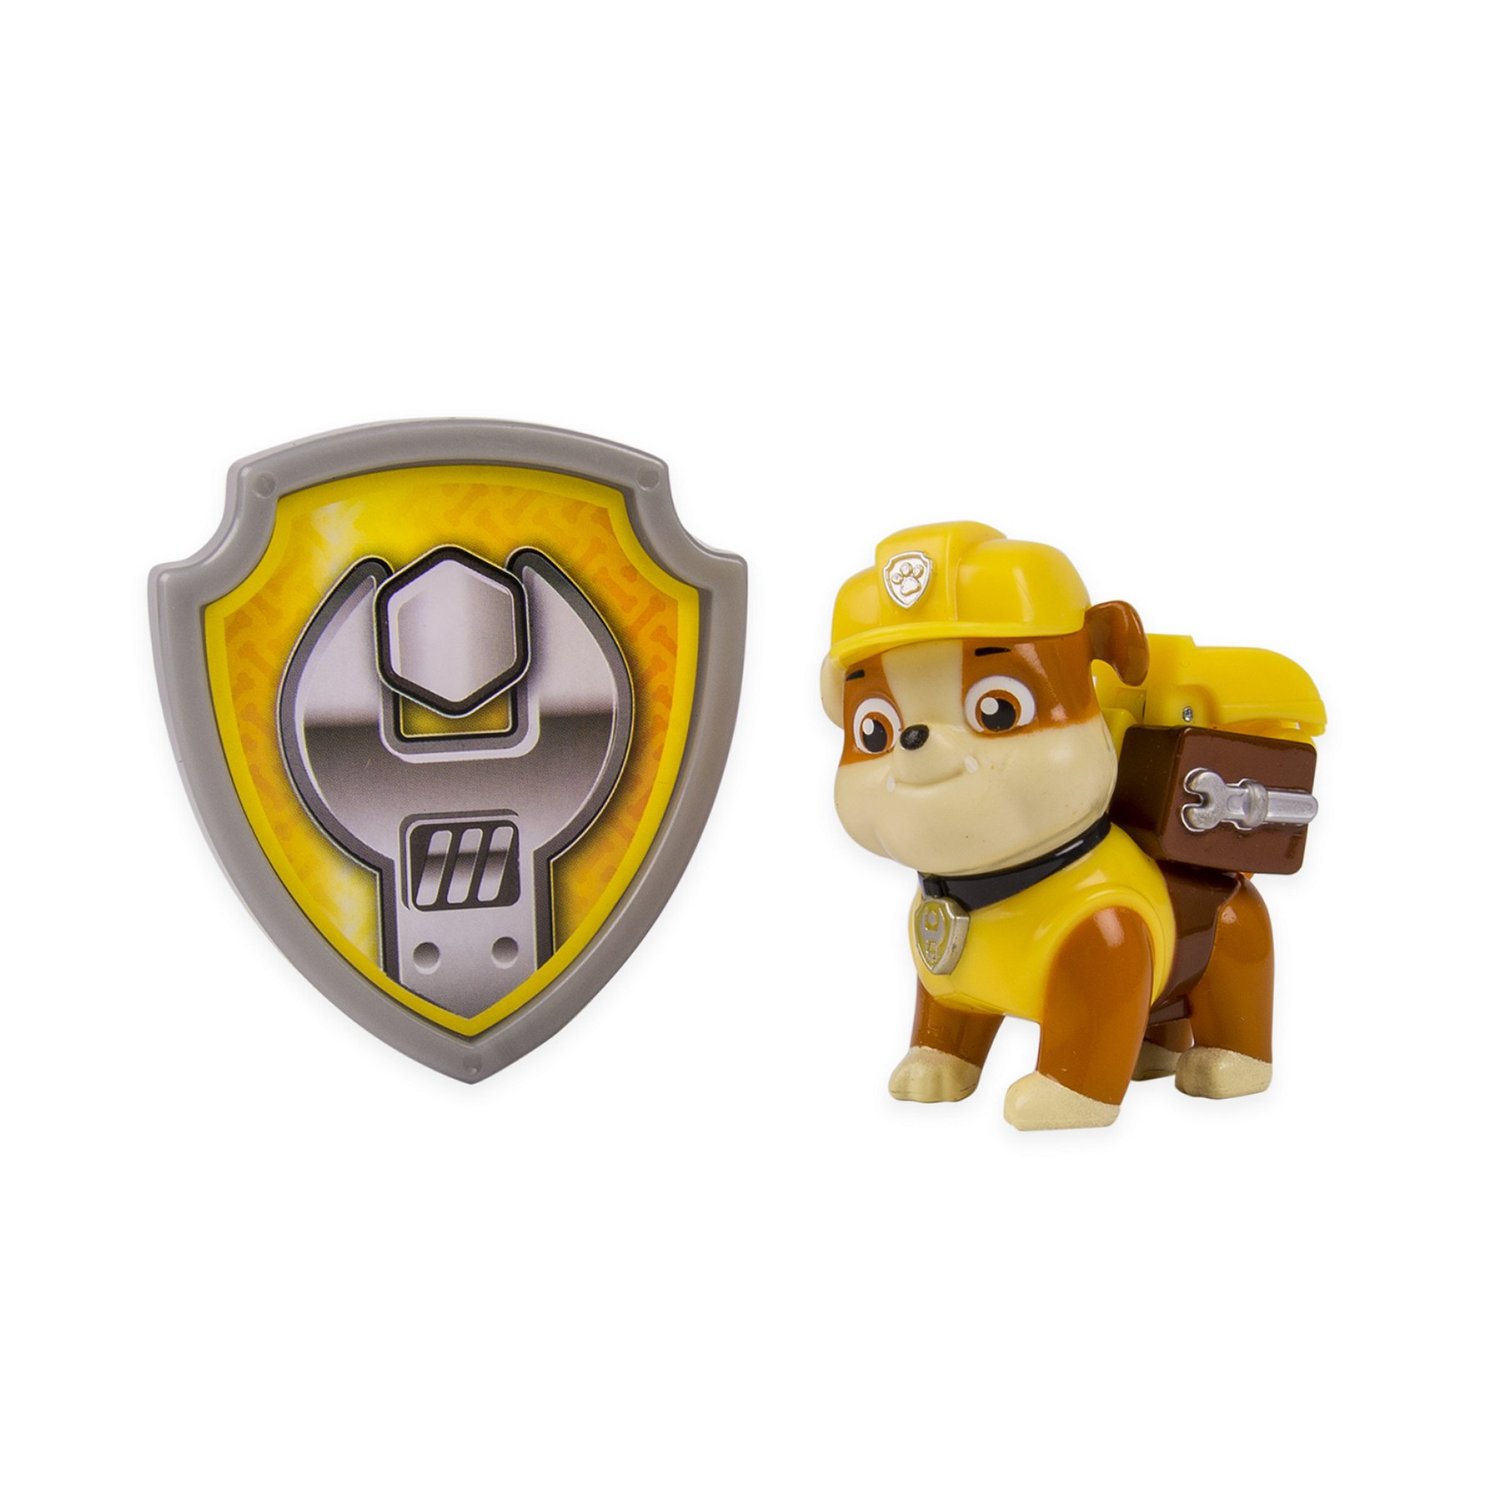 Nickelodeon, Paw Patrol – Action Pack Pup & Badge – Rubble Only $5.69 (Reg. $8.99)